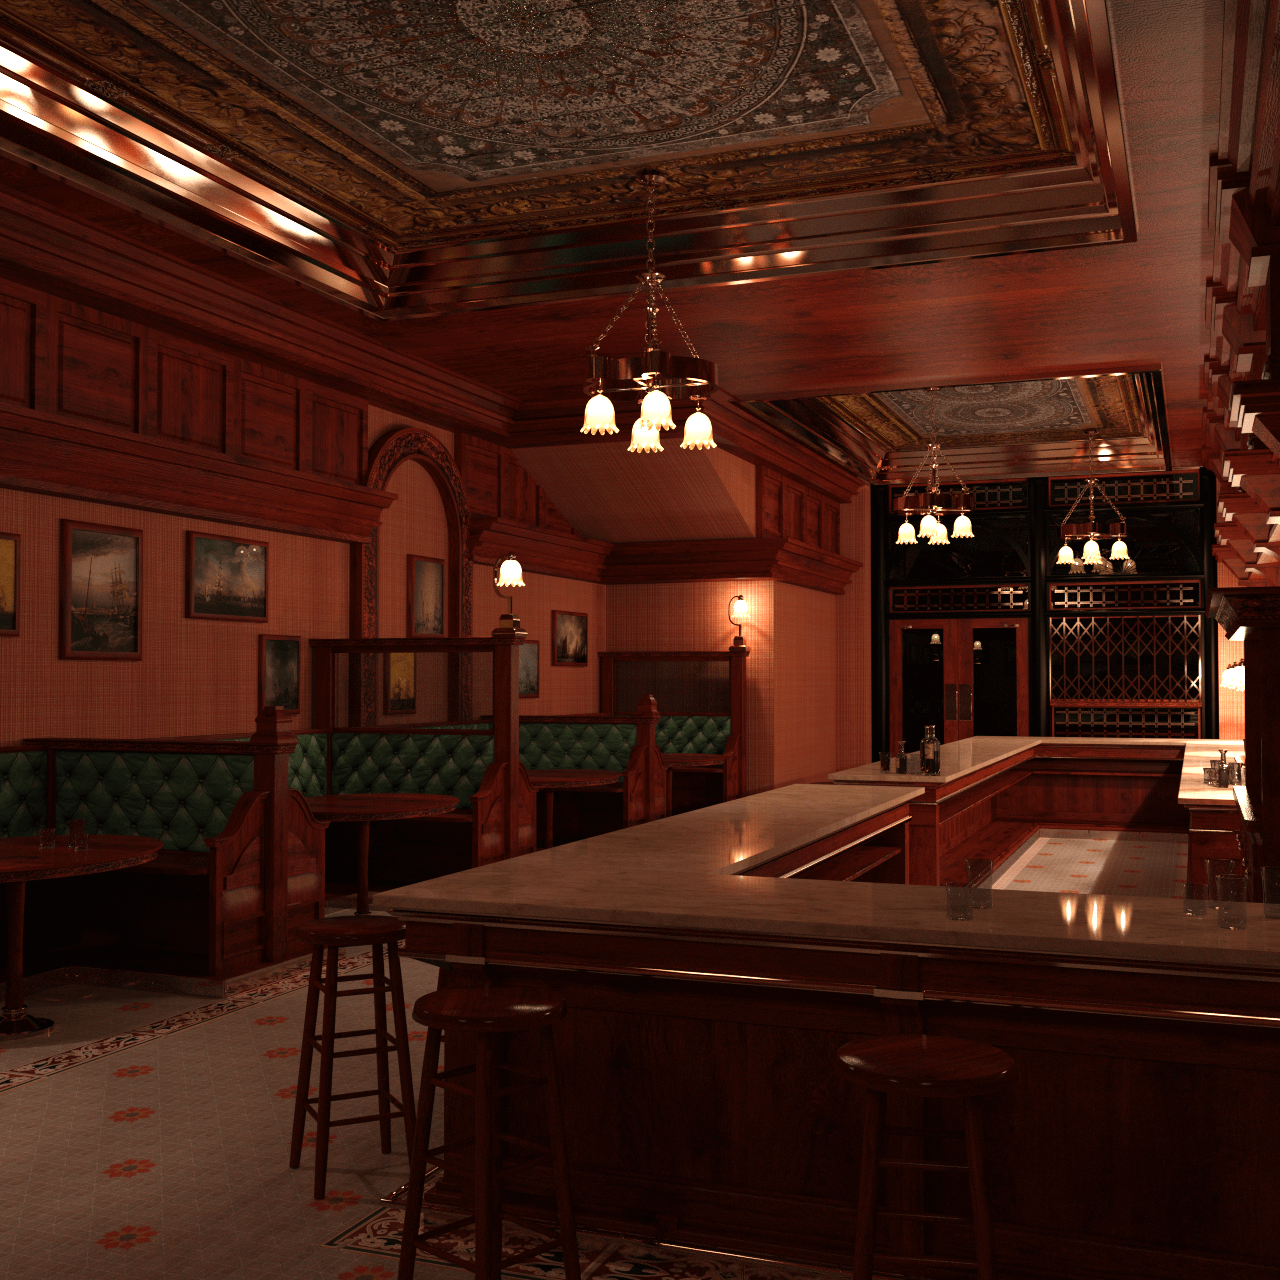 Another view of the bar interior